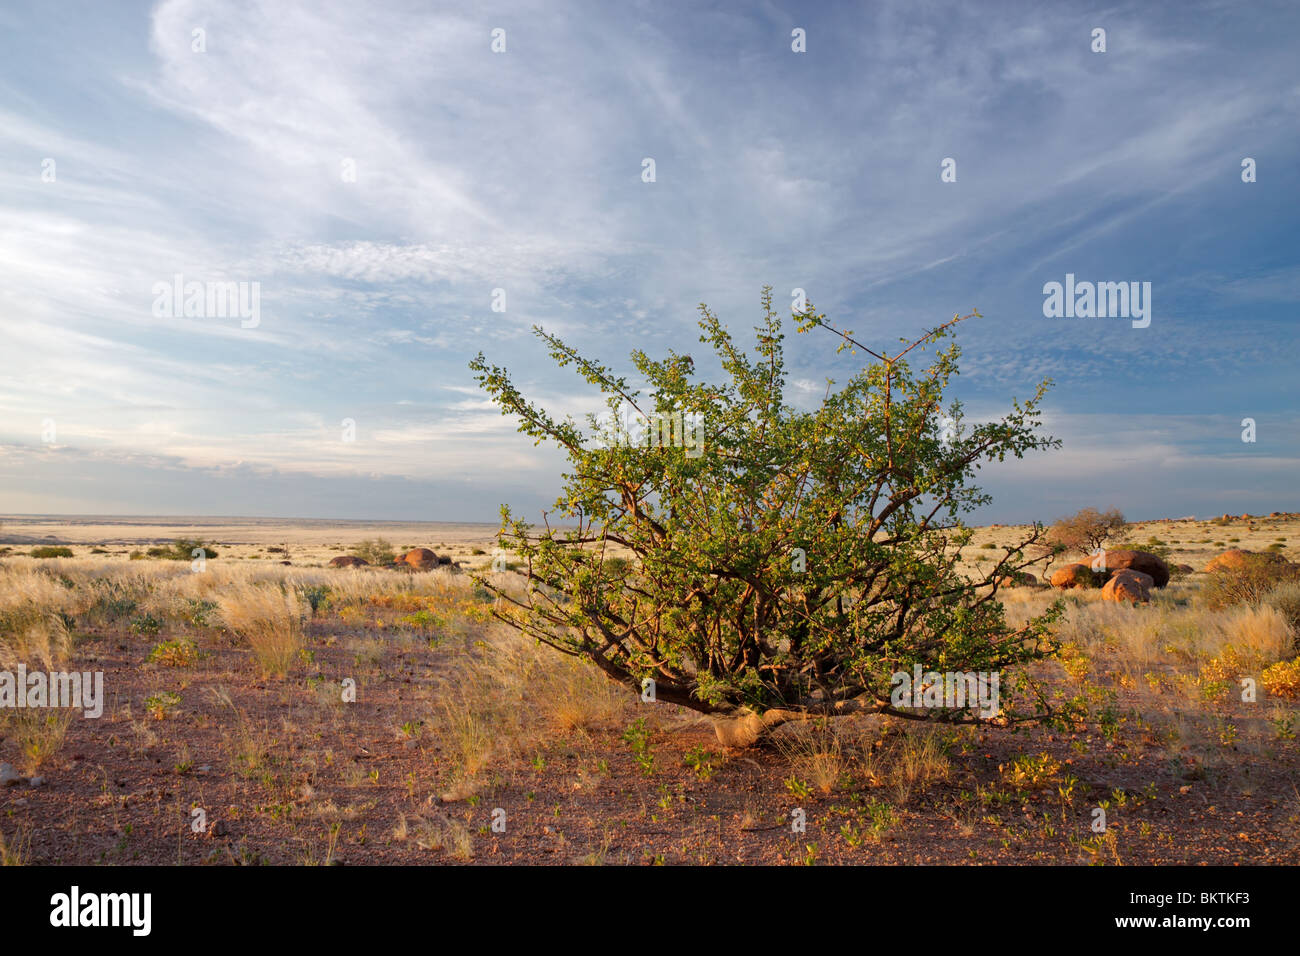 A desert plant (Commiphora spp.) against a blue sky with clouds, Namibia, southern Africa Stock Photo